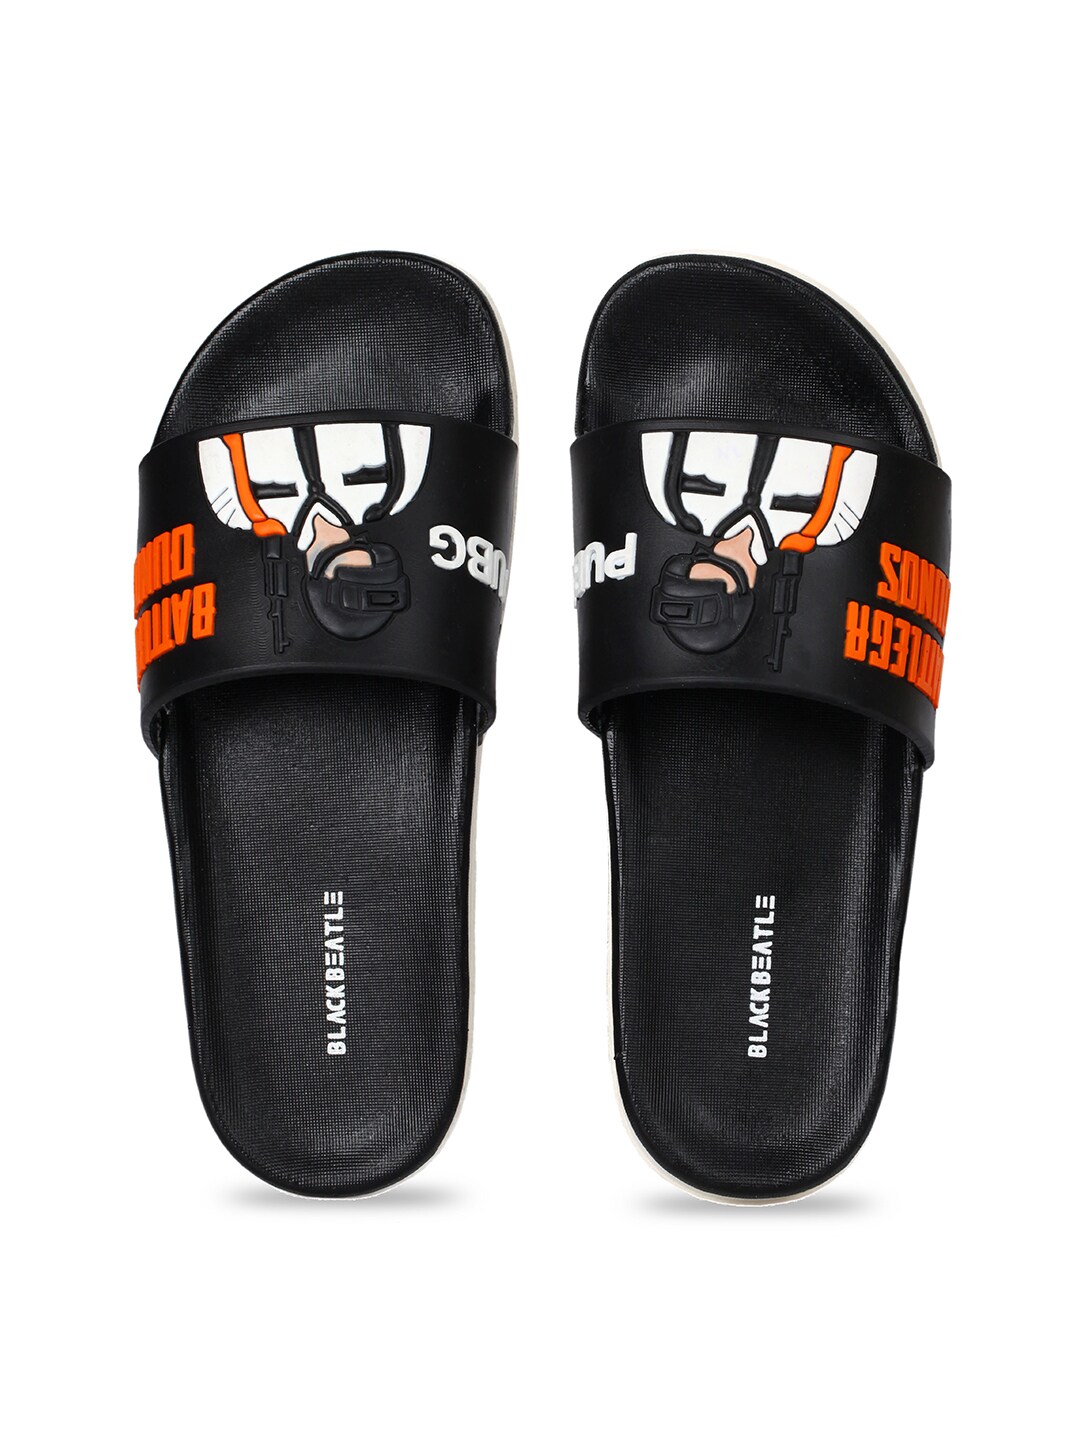 Blue 10 Flip Flops - Get Best Price from Manufacturers & Suppliers in India